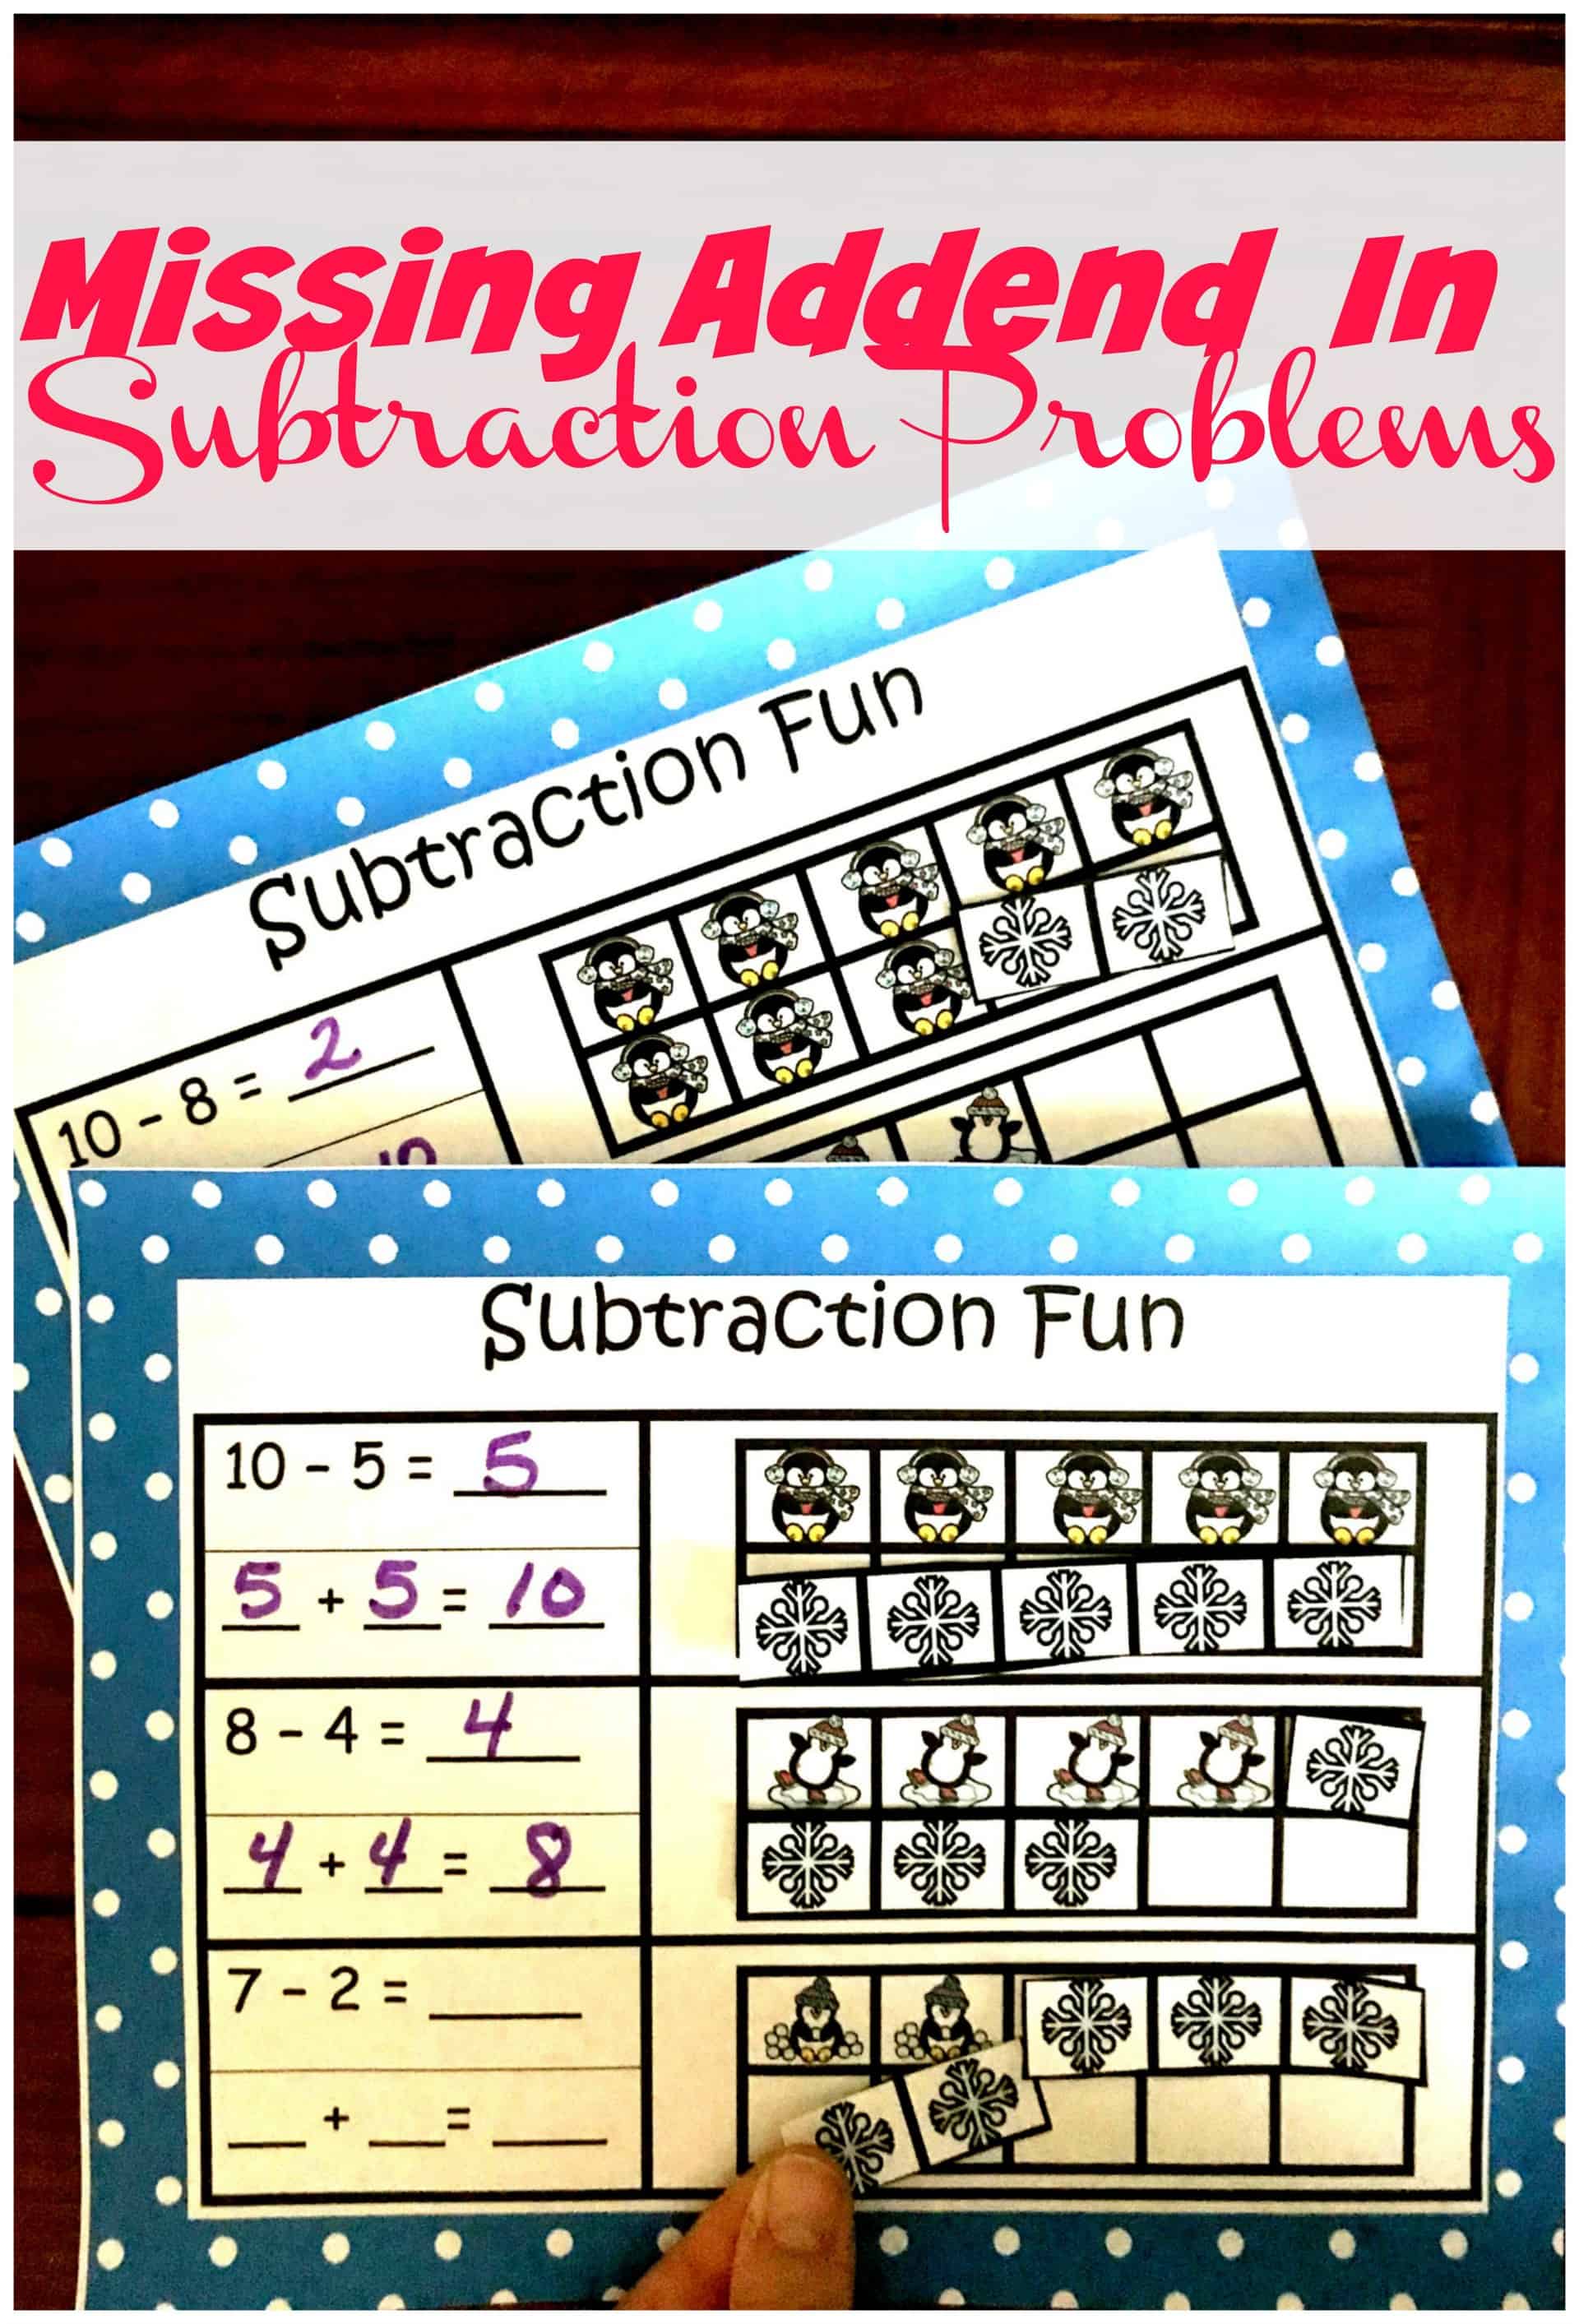 Help children understand counting on or missing addend in a subtraction problem with this no-prep cut and paste sheet. They will begin to understand subtraction as an unknown-addend problem. For example, For subtract 12 - 7 by finding the number that makes 12 when added to 7.